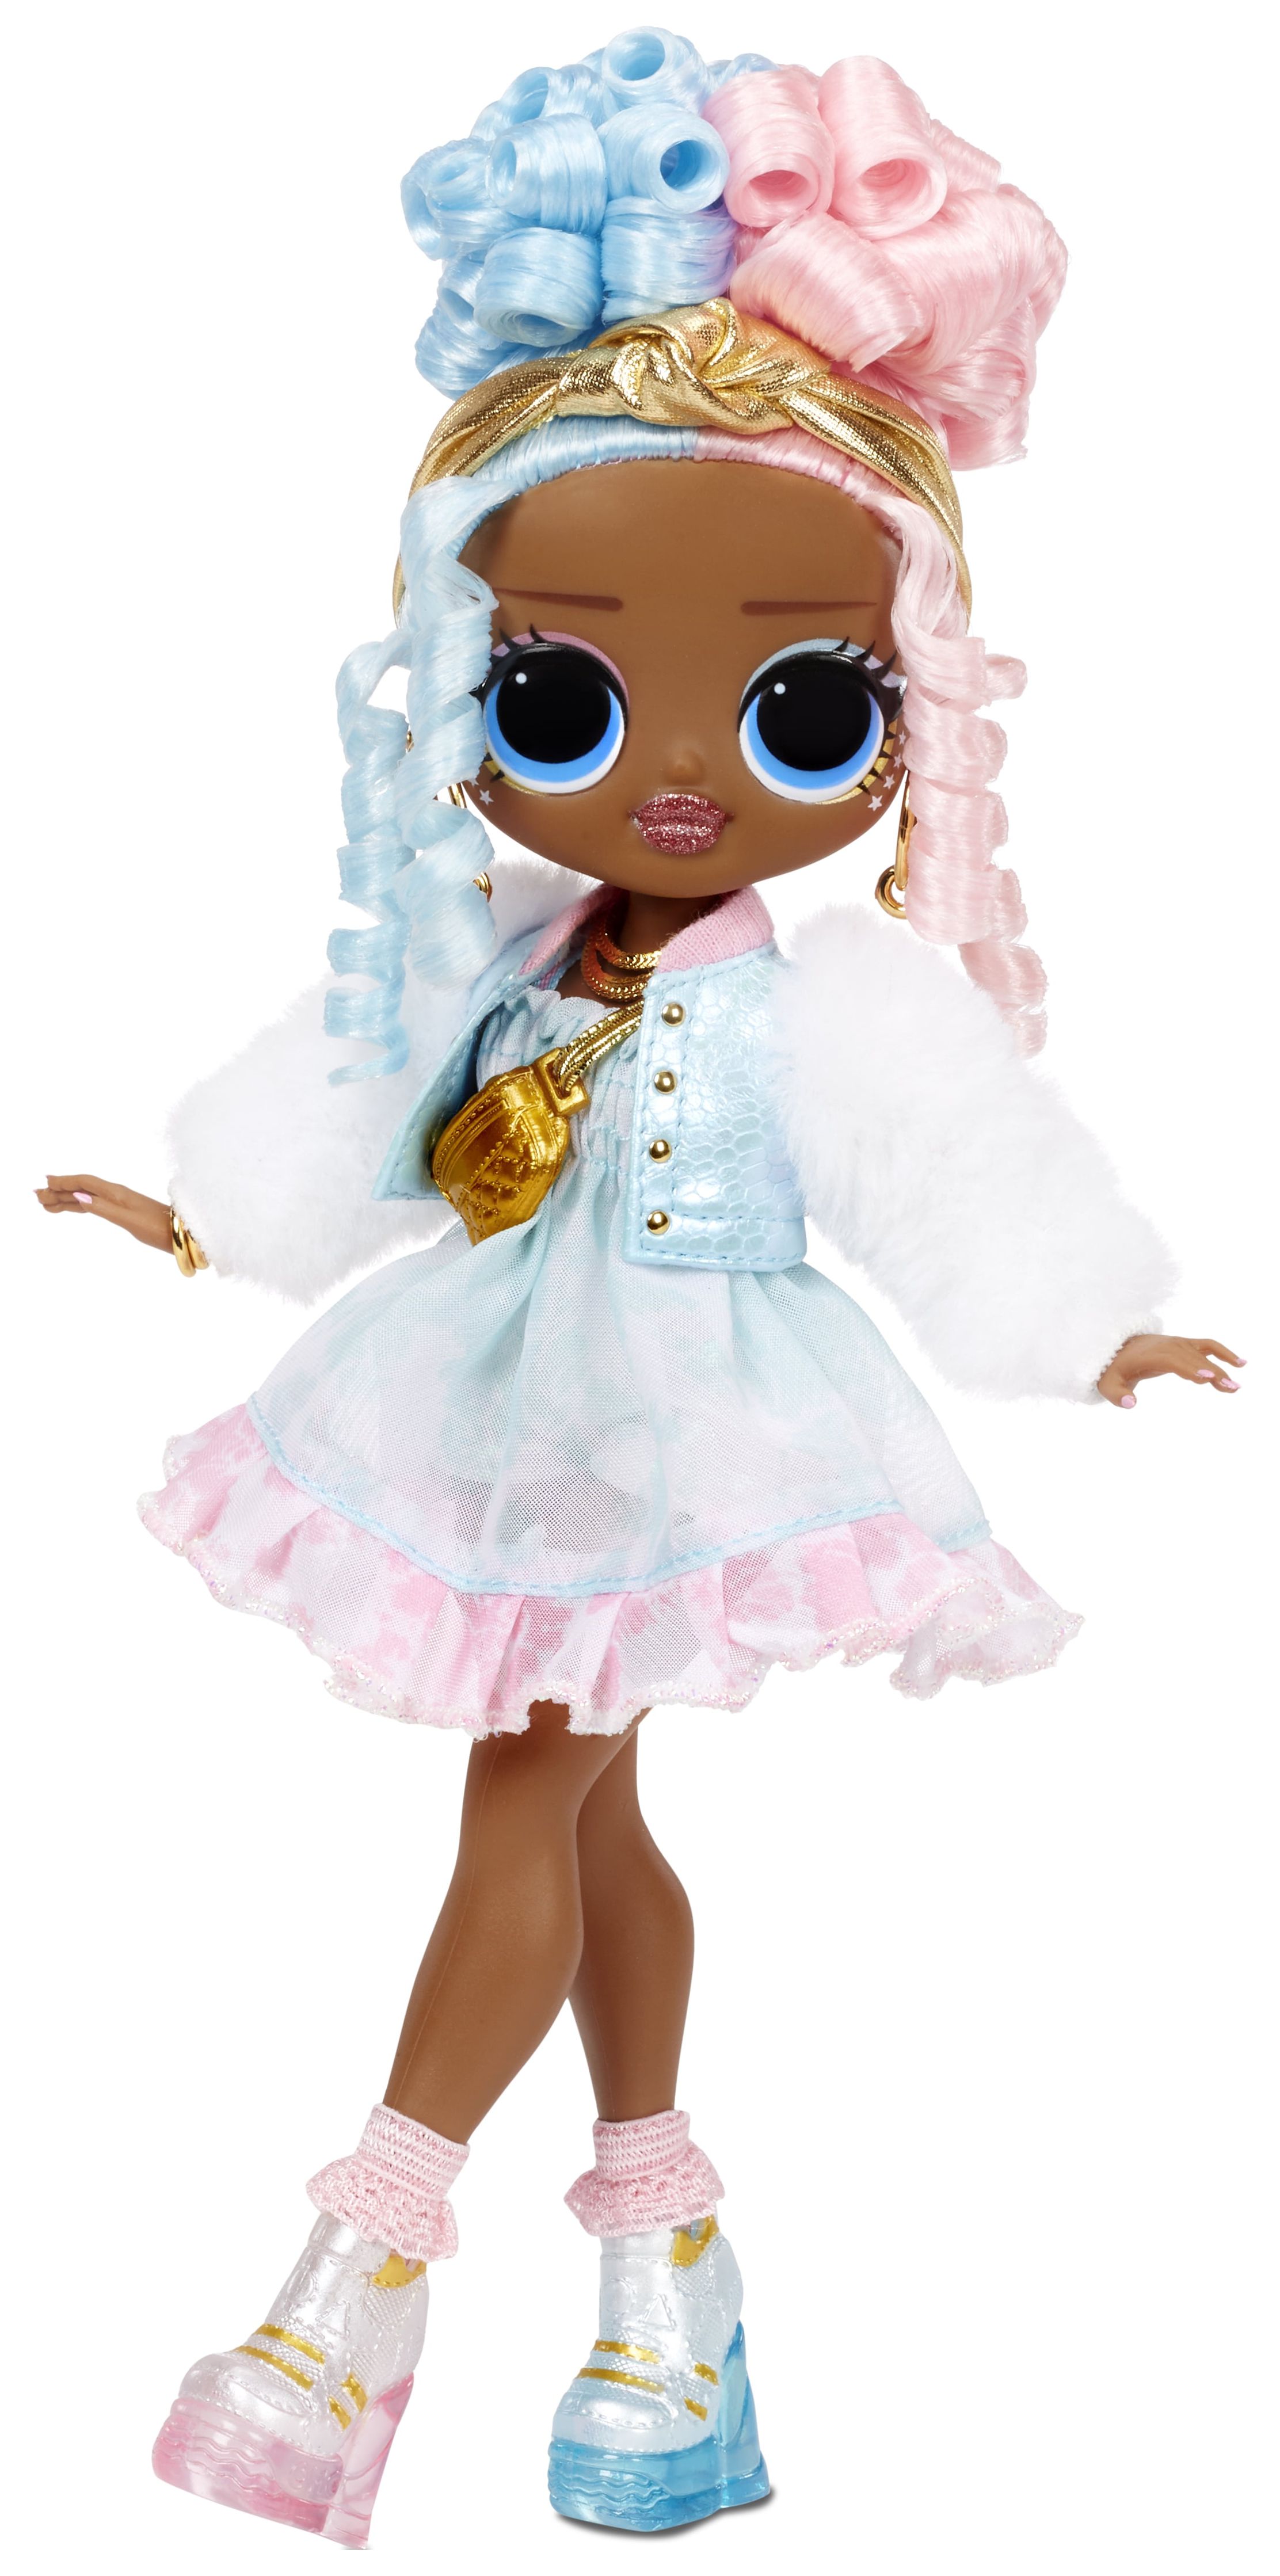 LOL Surprise OMG Sweets Fashion Doll - Dress Up Doll Set with 20 Surprises for Girls and Kids 4+ - image 1 of 8